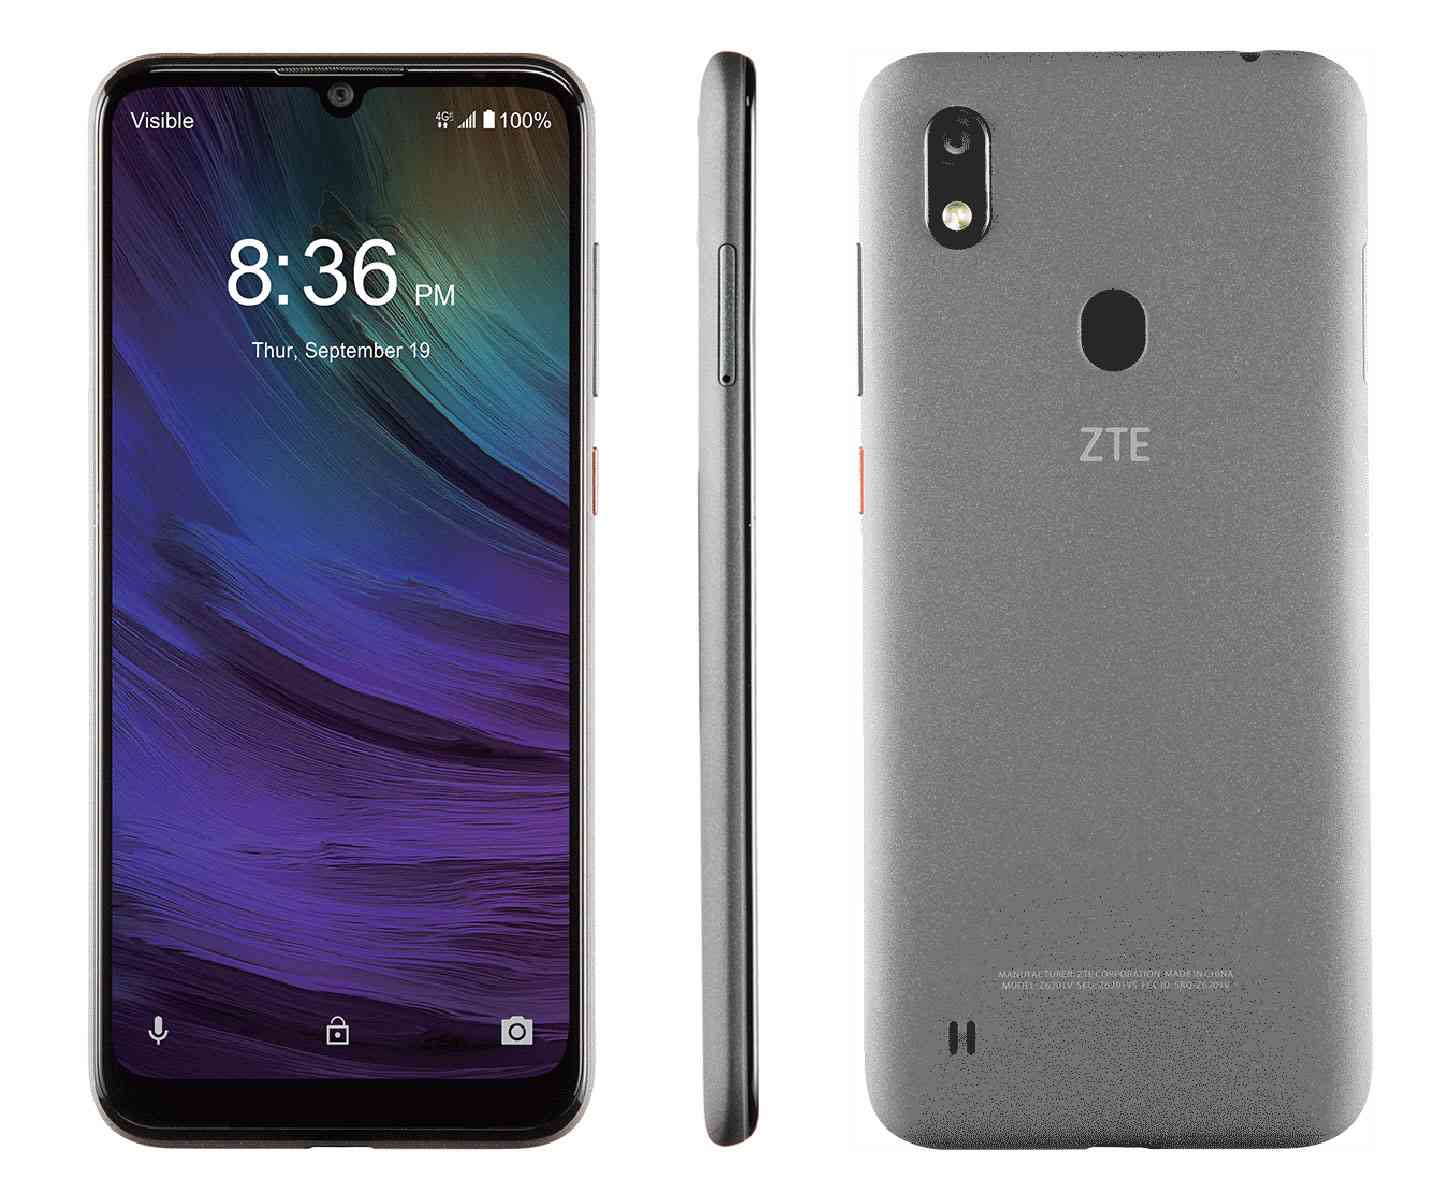 Overview of the smartphone ZTE Blade A7 Prime with key features